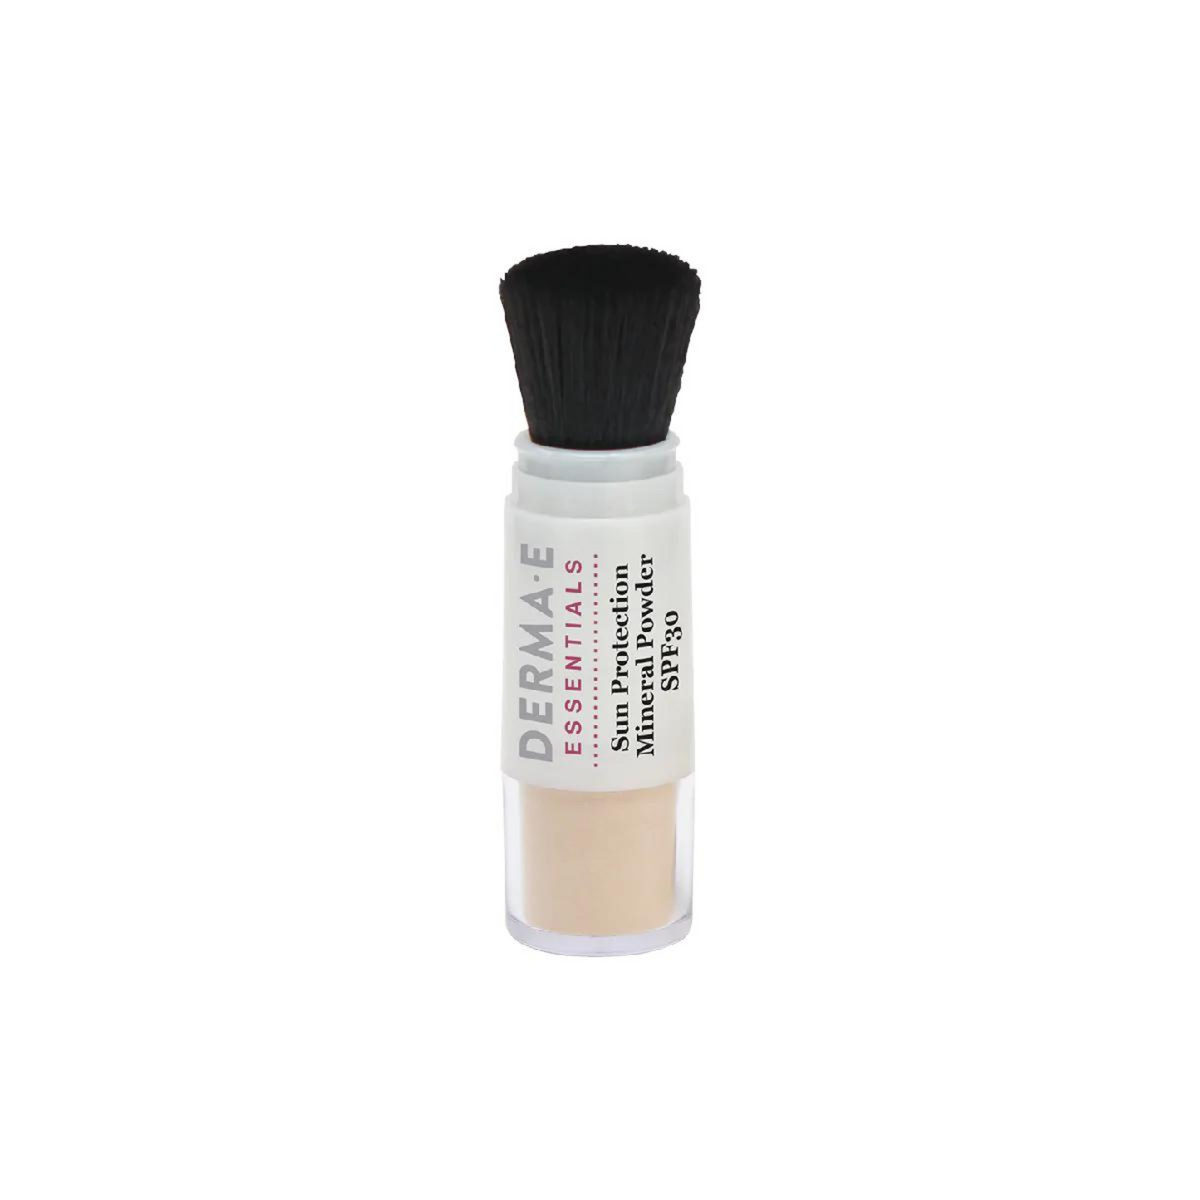 Primary Image of Sun Protection Mineral Powder SPF 30